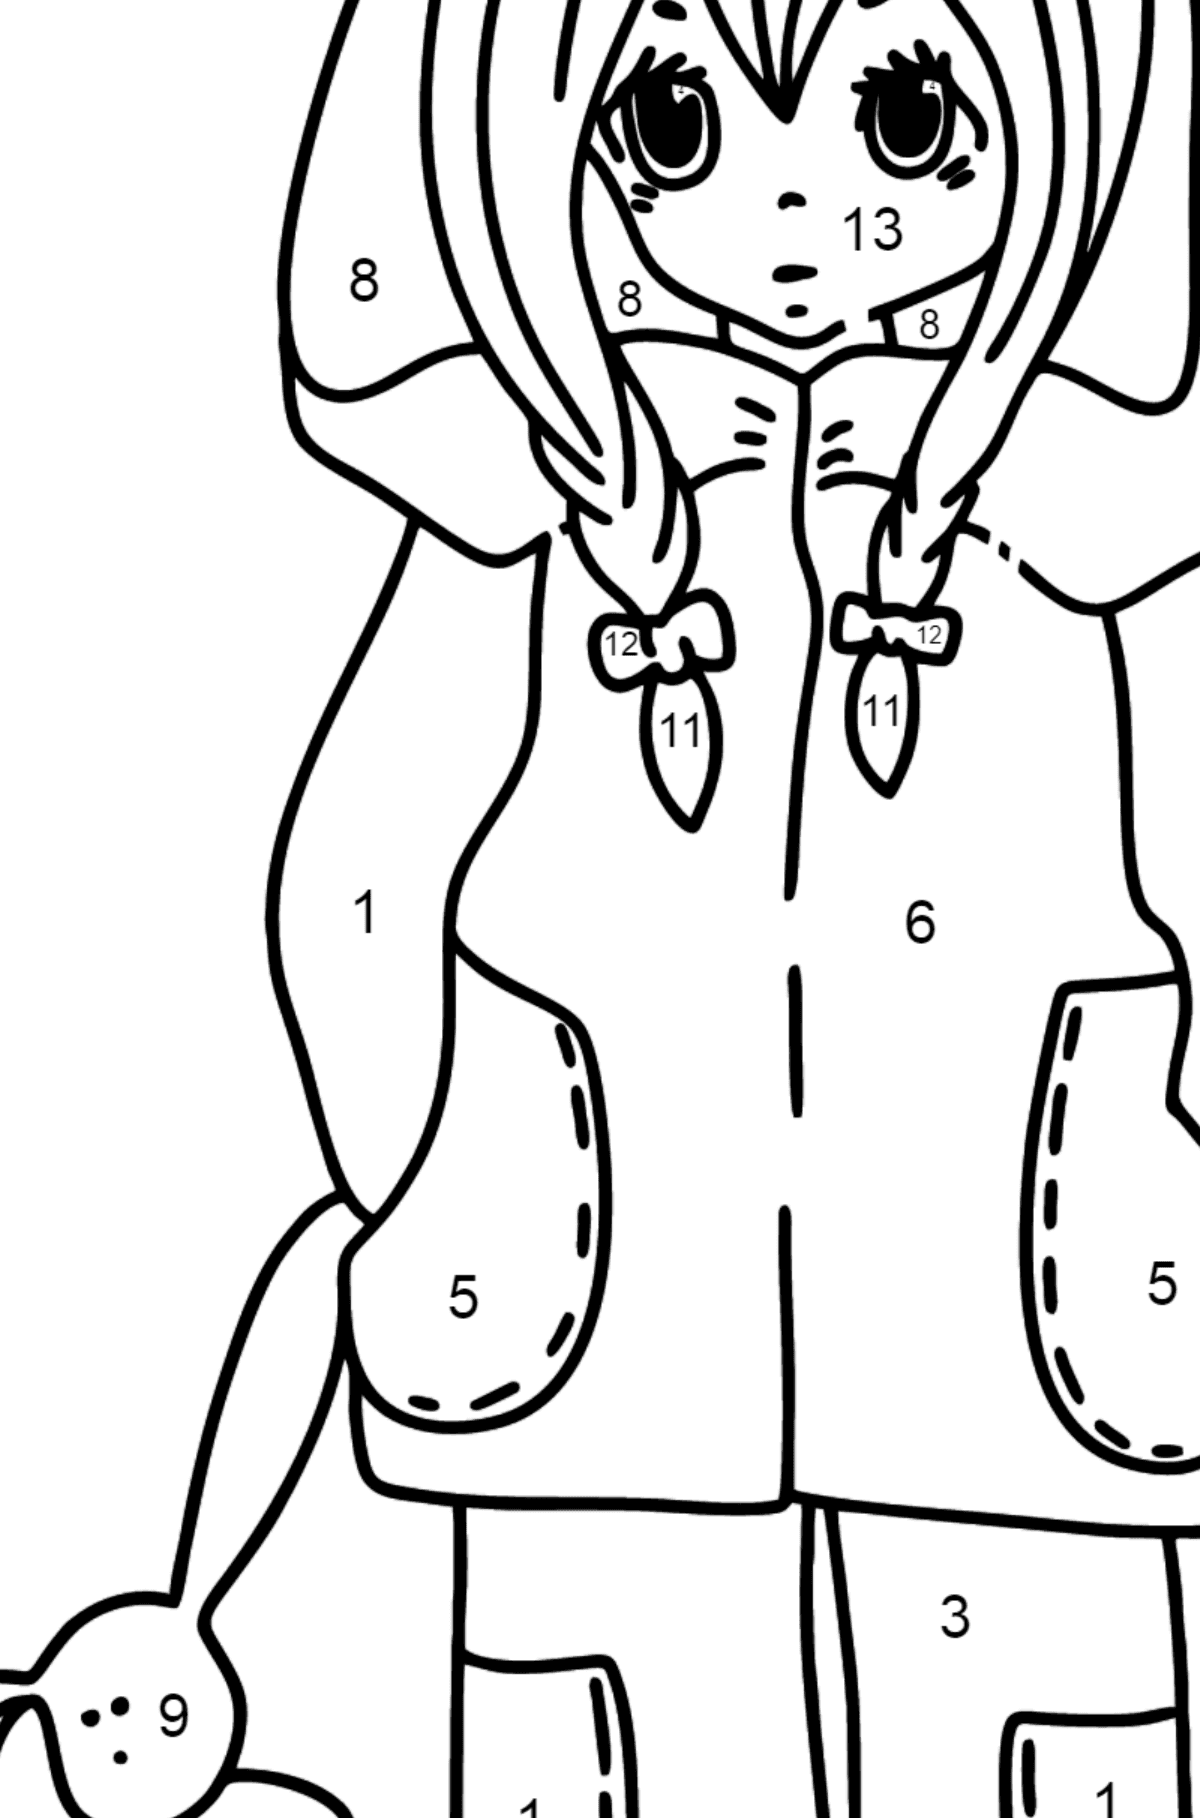 Anime girl with pigtails coloring page - Coloring by Numbers for Kids